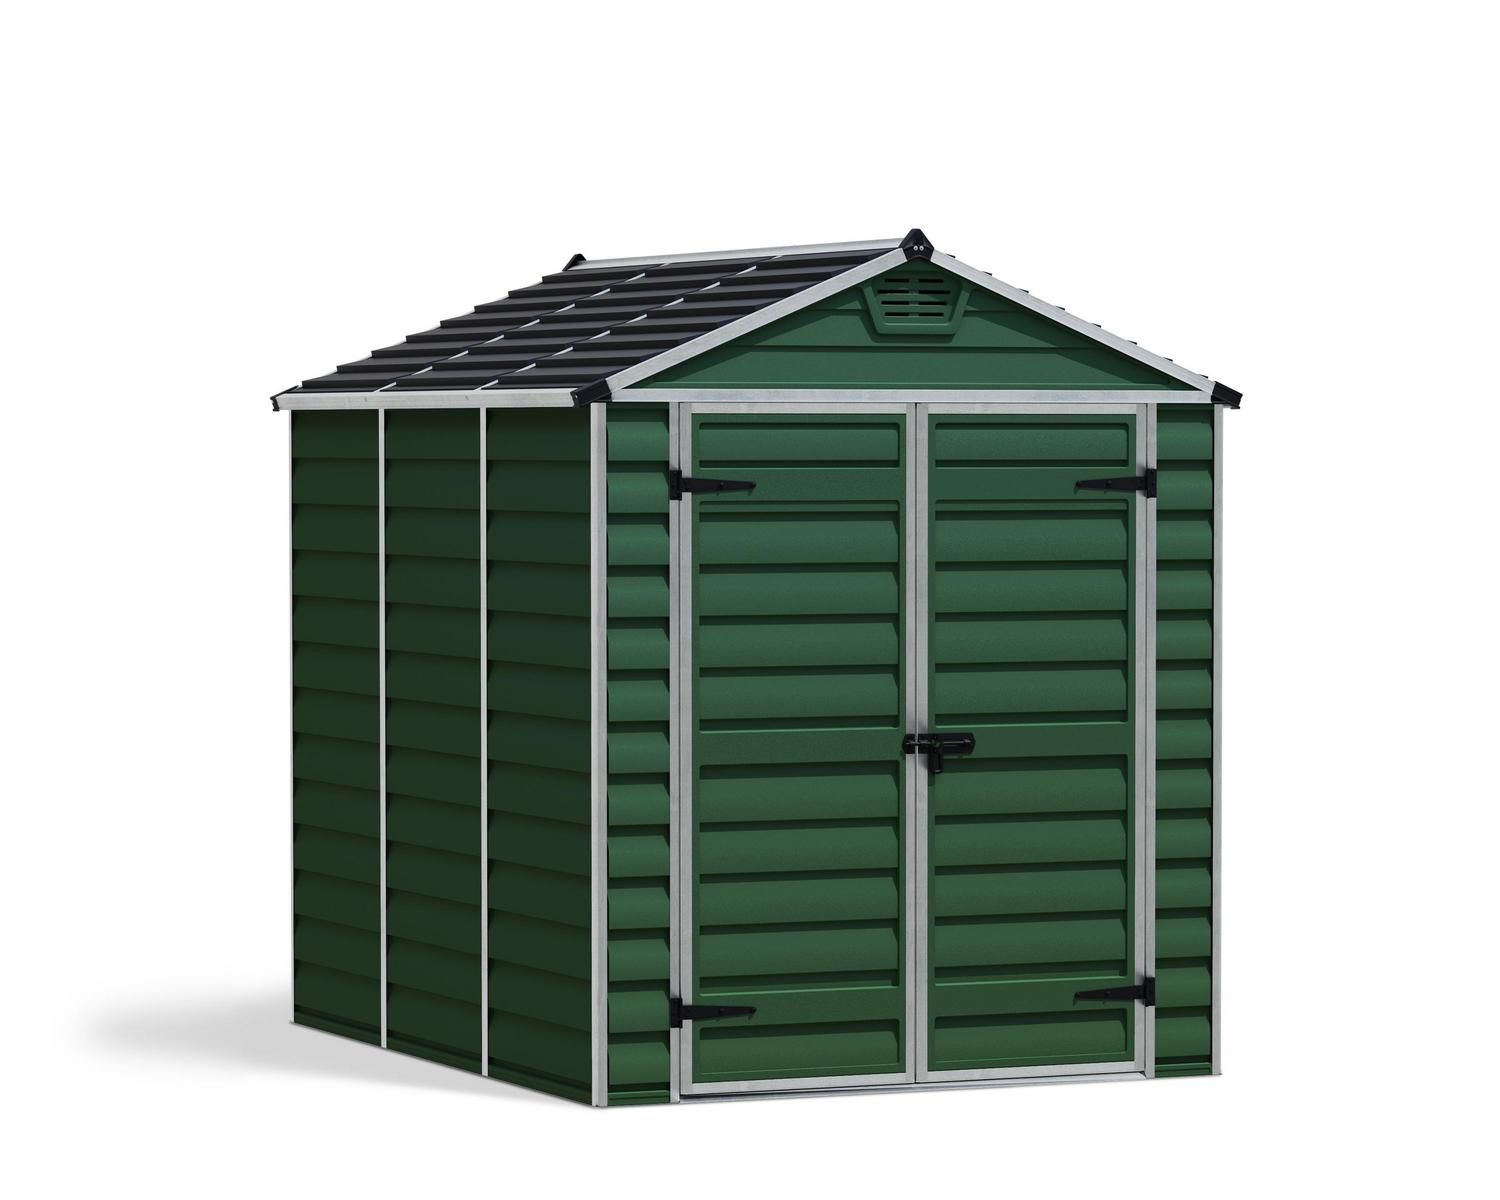 Skylight 6' x 8' Plastic Storage Shed with Green Polycarbonate Walls & Aluminium Frame